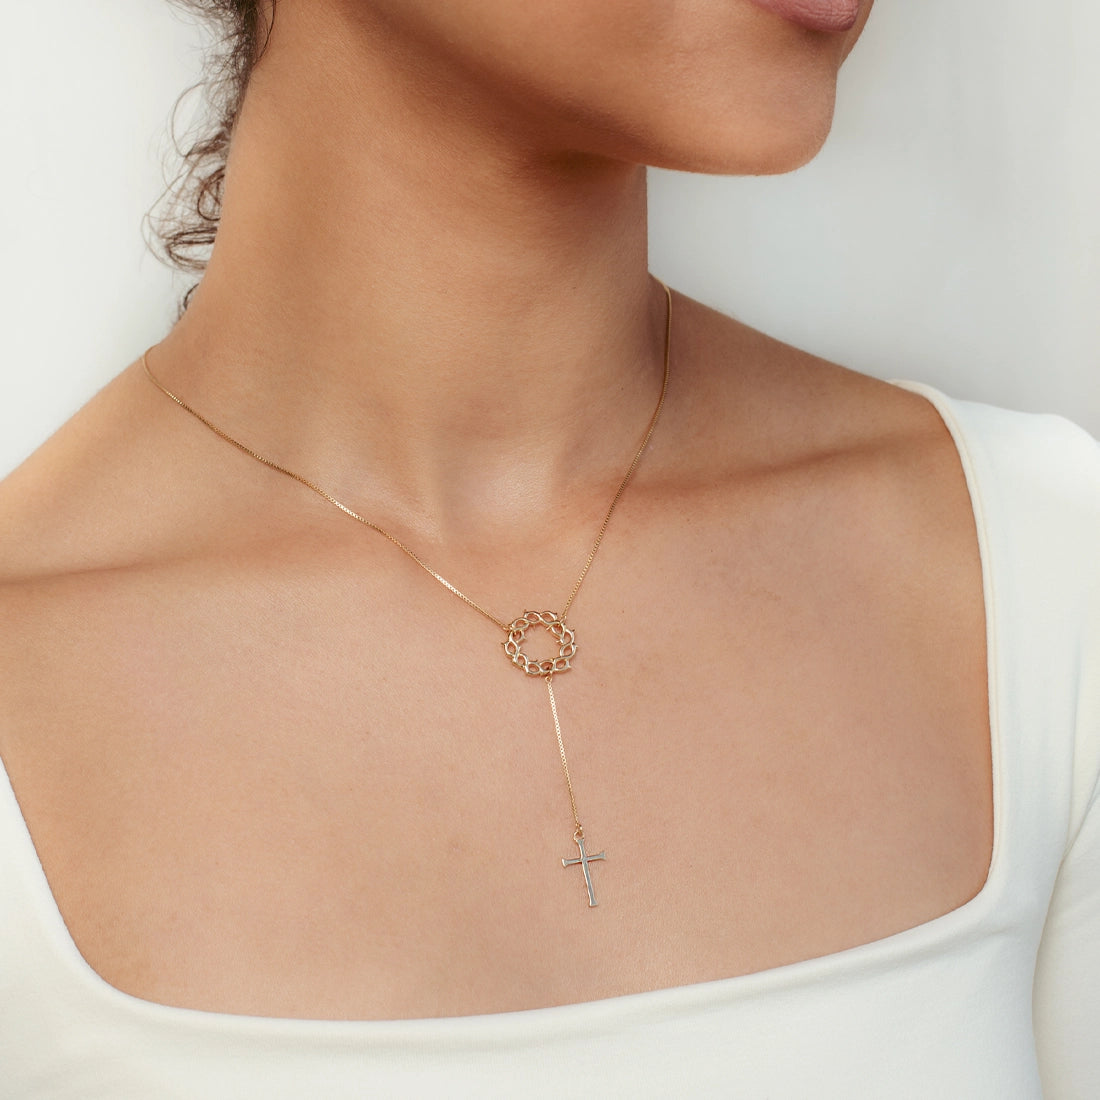 Christian woman wearing 18k gold vermeil Crown of Thorns Necklace with Cross Pendant from the Insignia Collection by Rizen Jewelry.